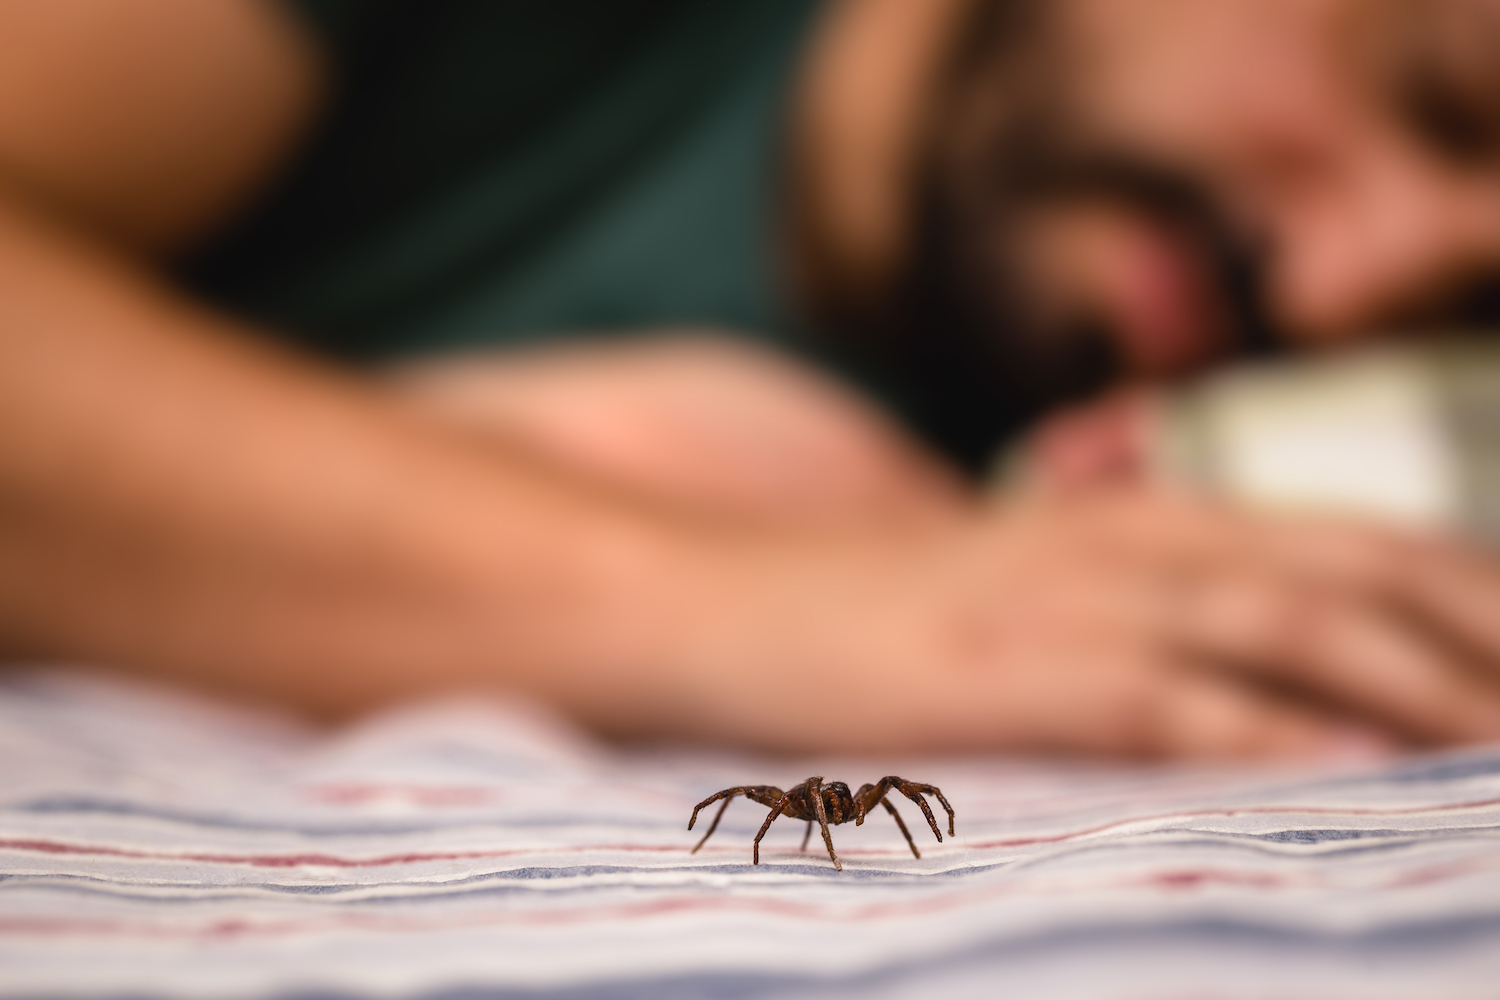 A spider crawling on a bed while a man sleeps.